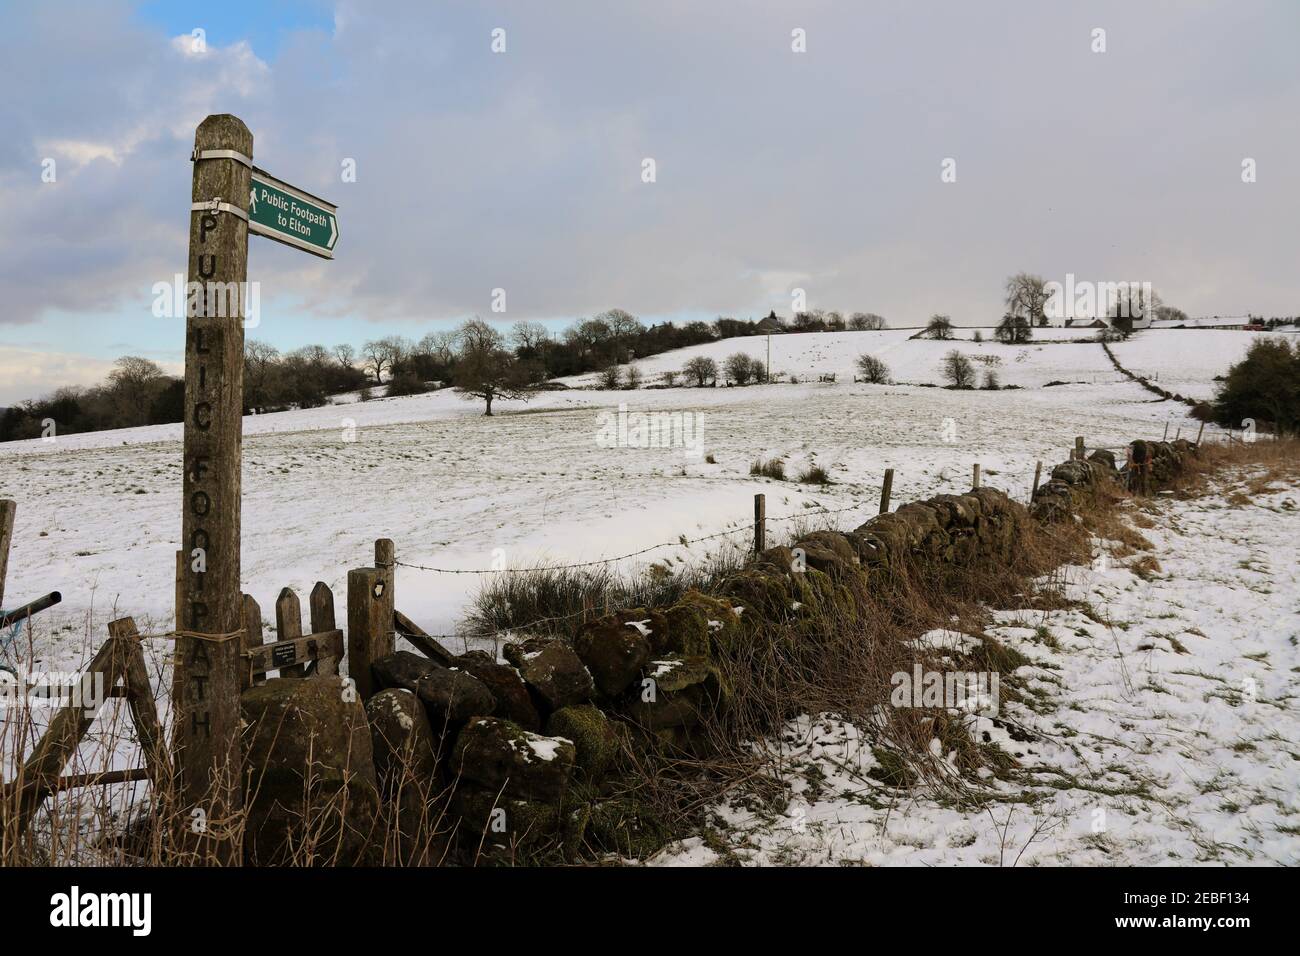 Public footpath to Elton from Cliff Lane in the Derbyshire Peak District Stock Photo